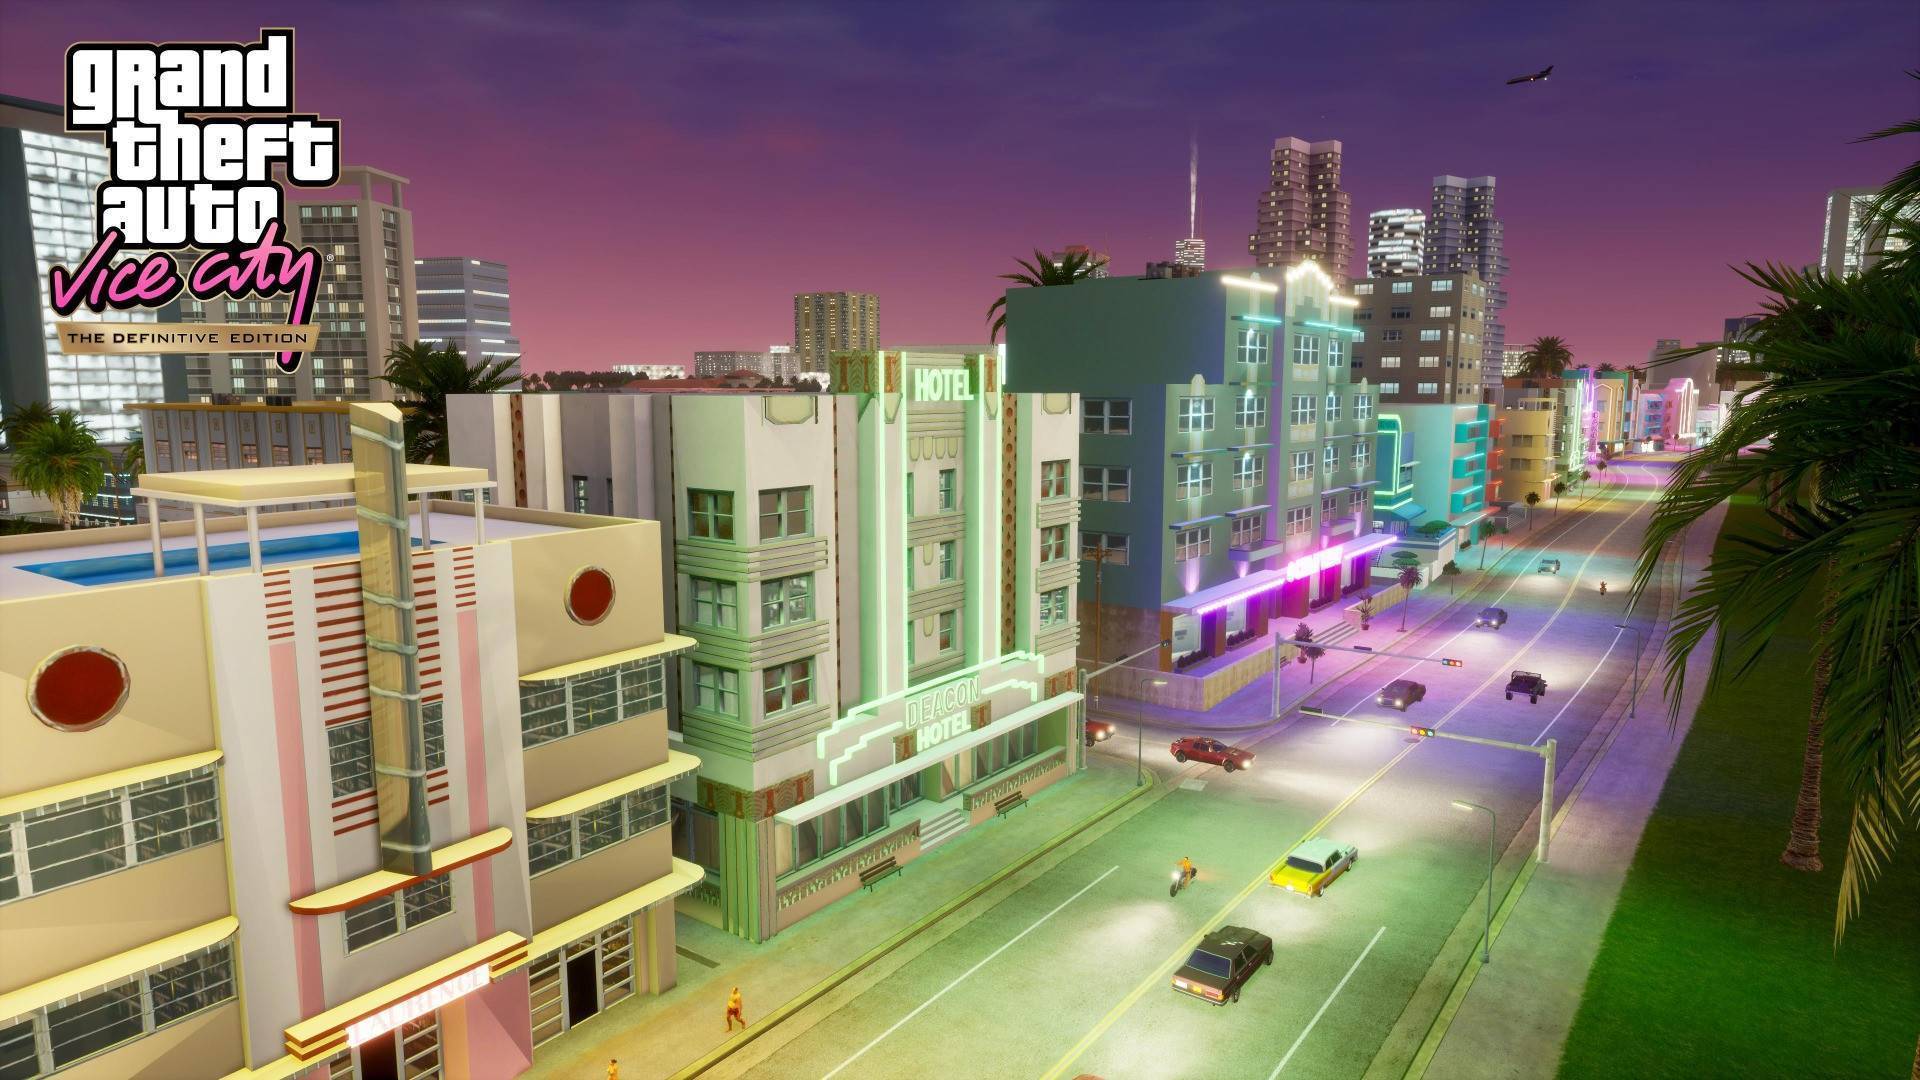 Grand Theft Auto III – The Definitive Edition em breve - Epic Games Store